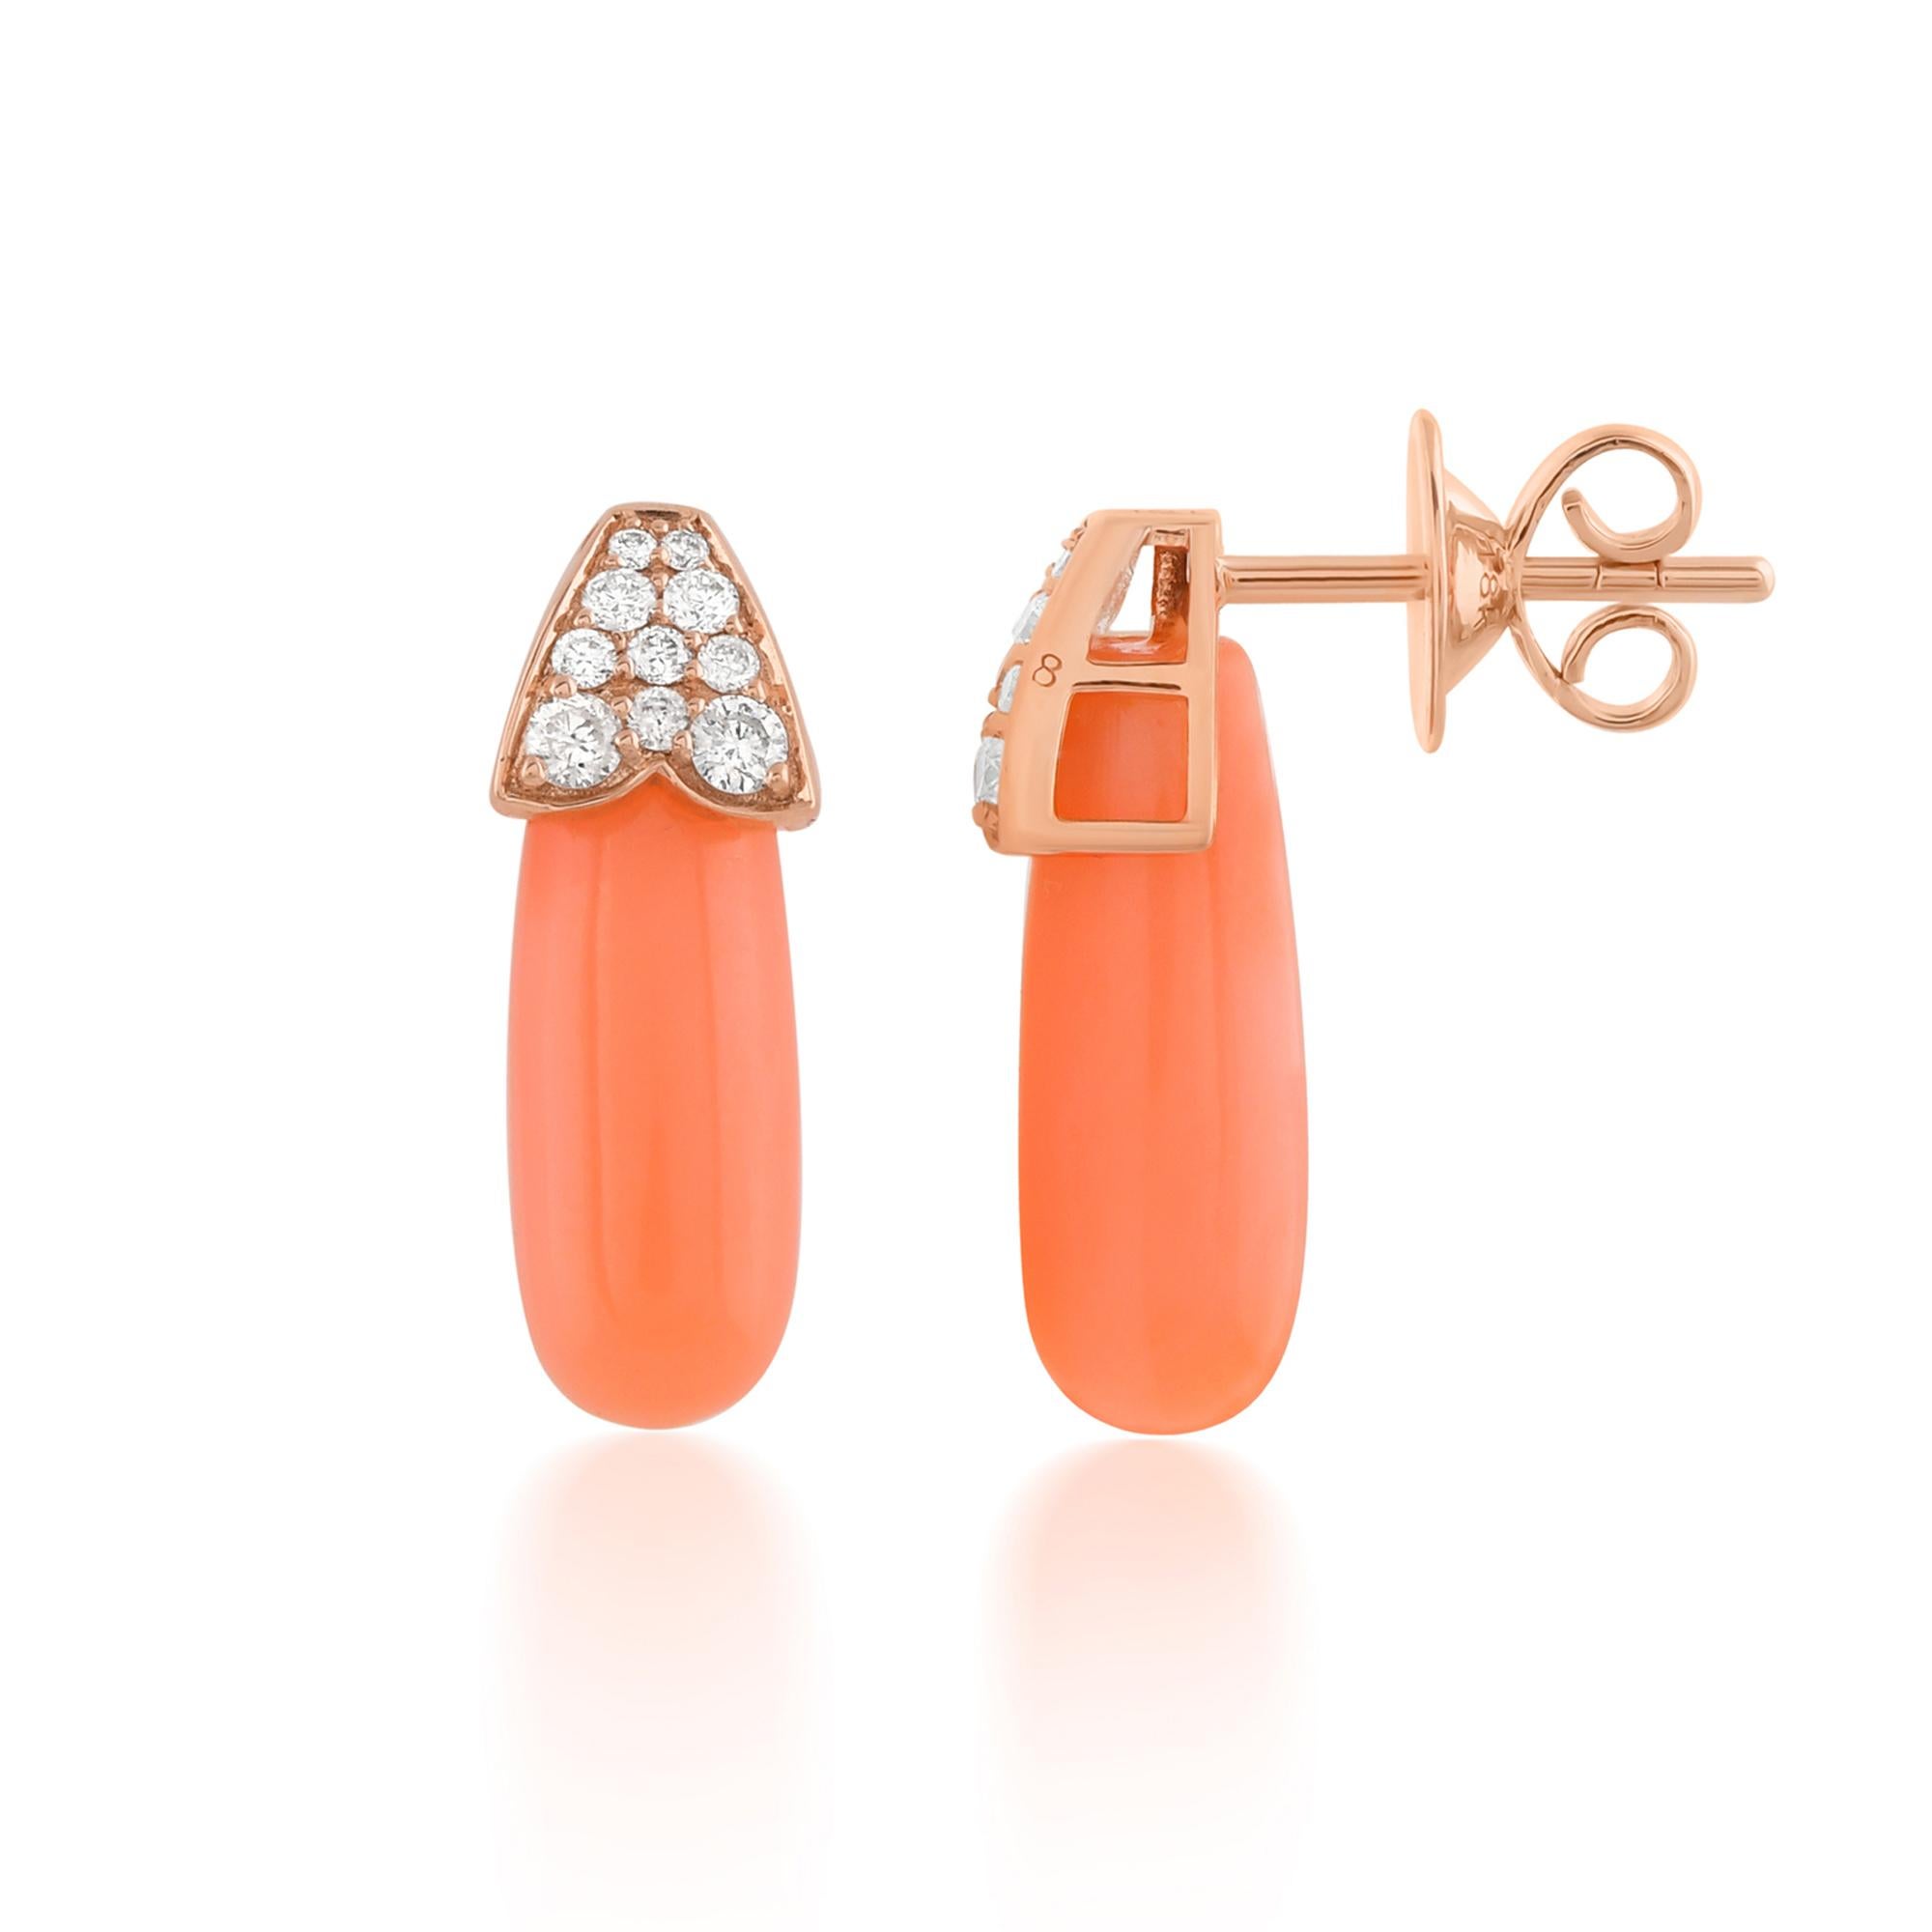 Item Code :- SEE-15628 (14k)
Gross Wt. :- 3.88 gm
14k Rose Gold Wt. :- 1.93 gm
Natural Diamond Wt. :- 0.30 Ct. ( AVERAGE DIAMOND CLARITY SI1-SI2 & COLOR H-I )
Coral Wt. :- 9.45 Ct.
Earrings Size :- 16 mm approx.

✦ Sizing
.....................
We